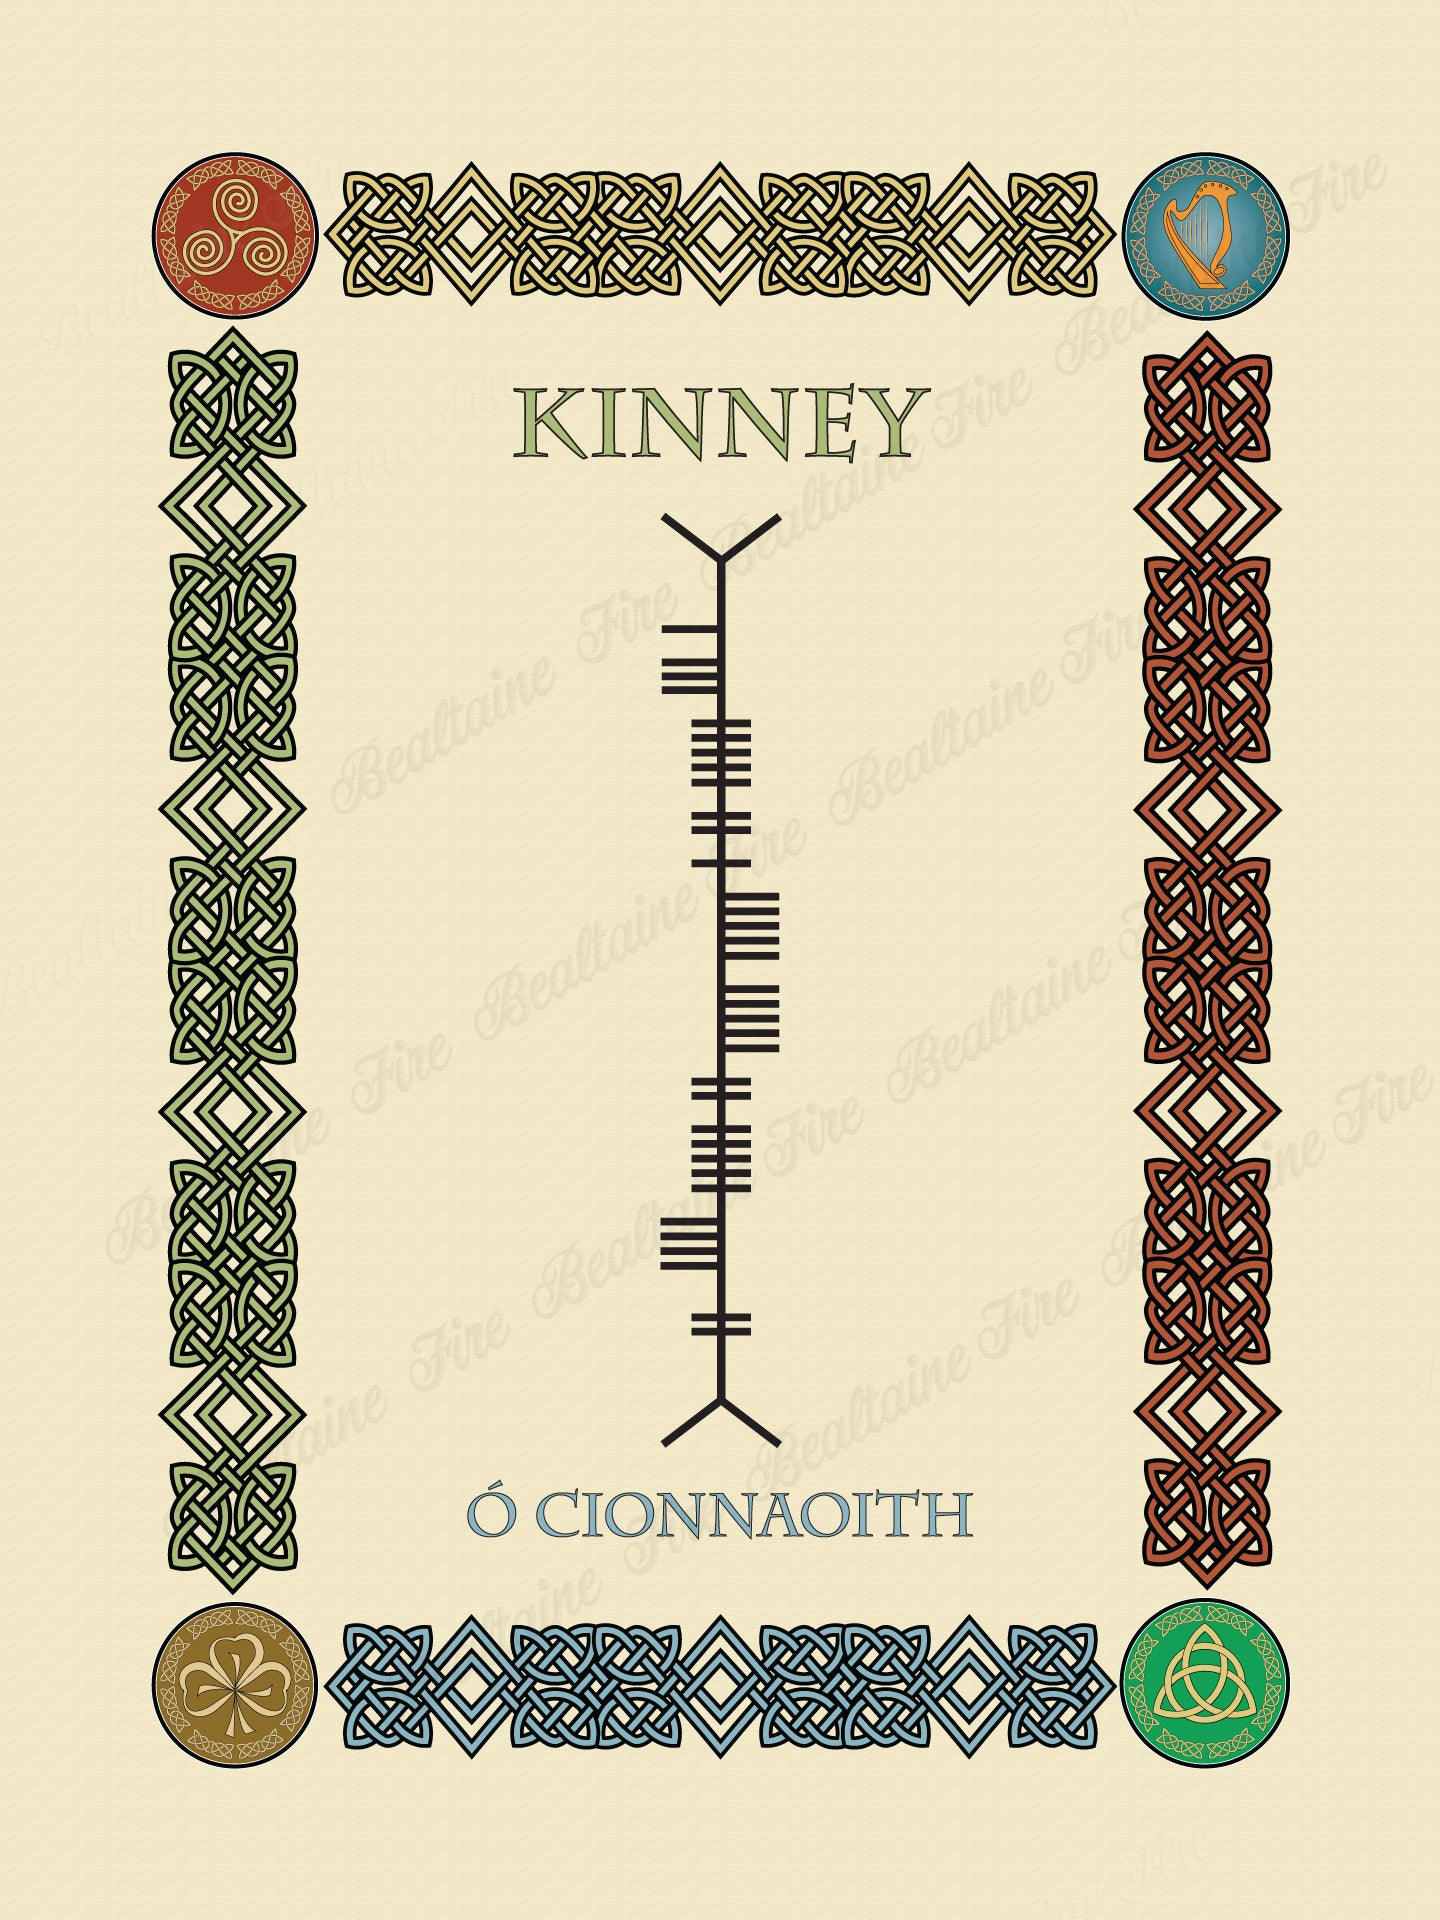 Kinney in Old Irish and Ogham - PDF Download